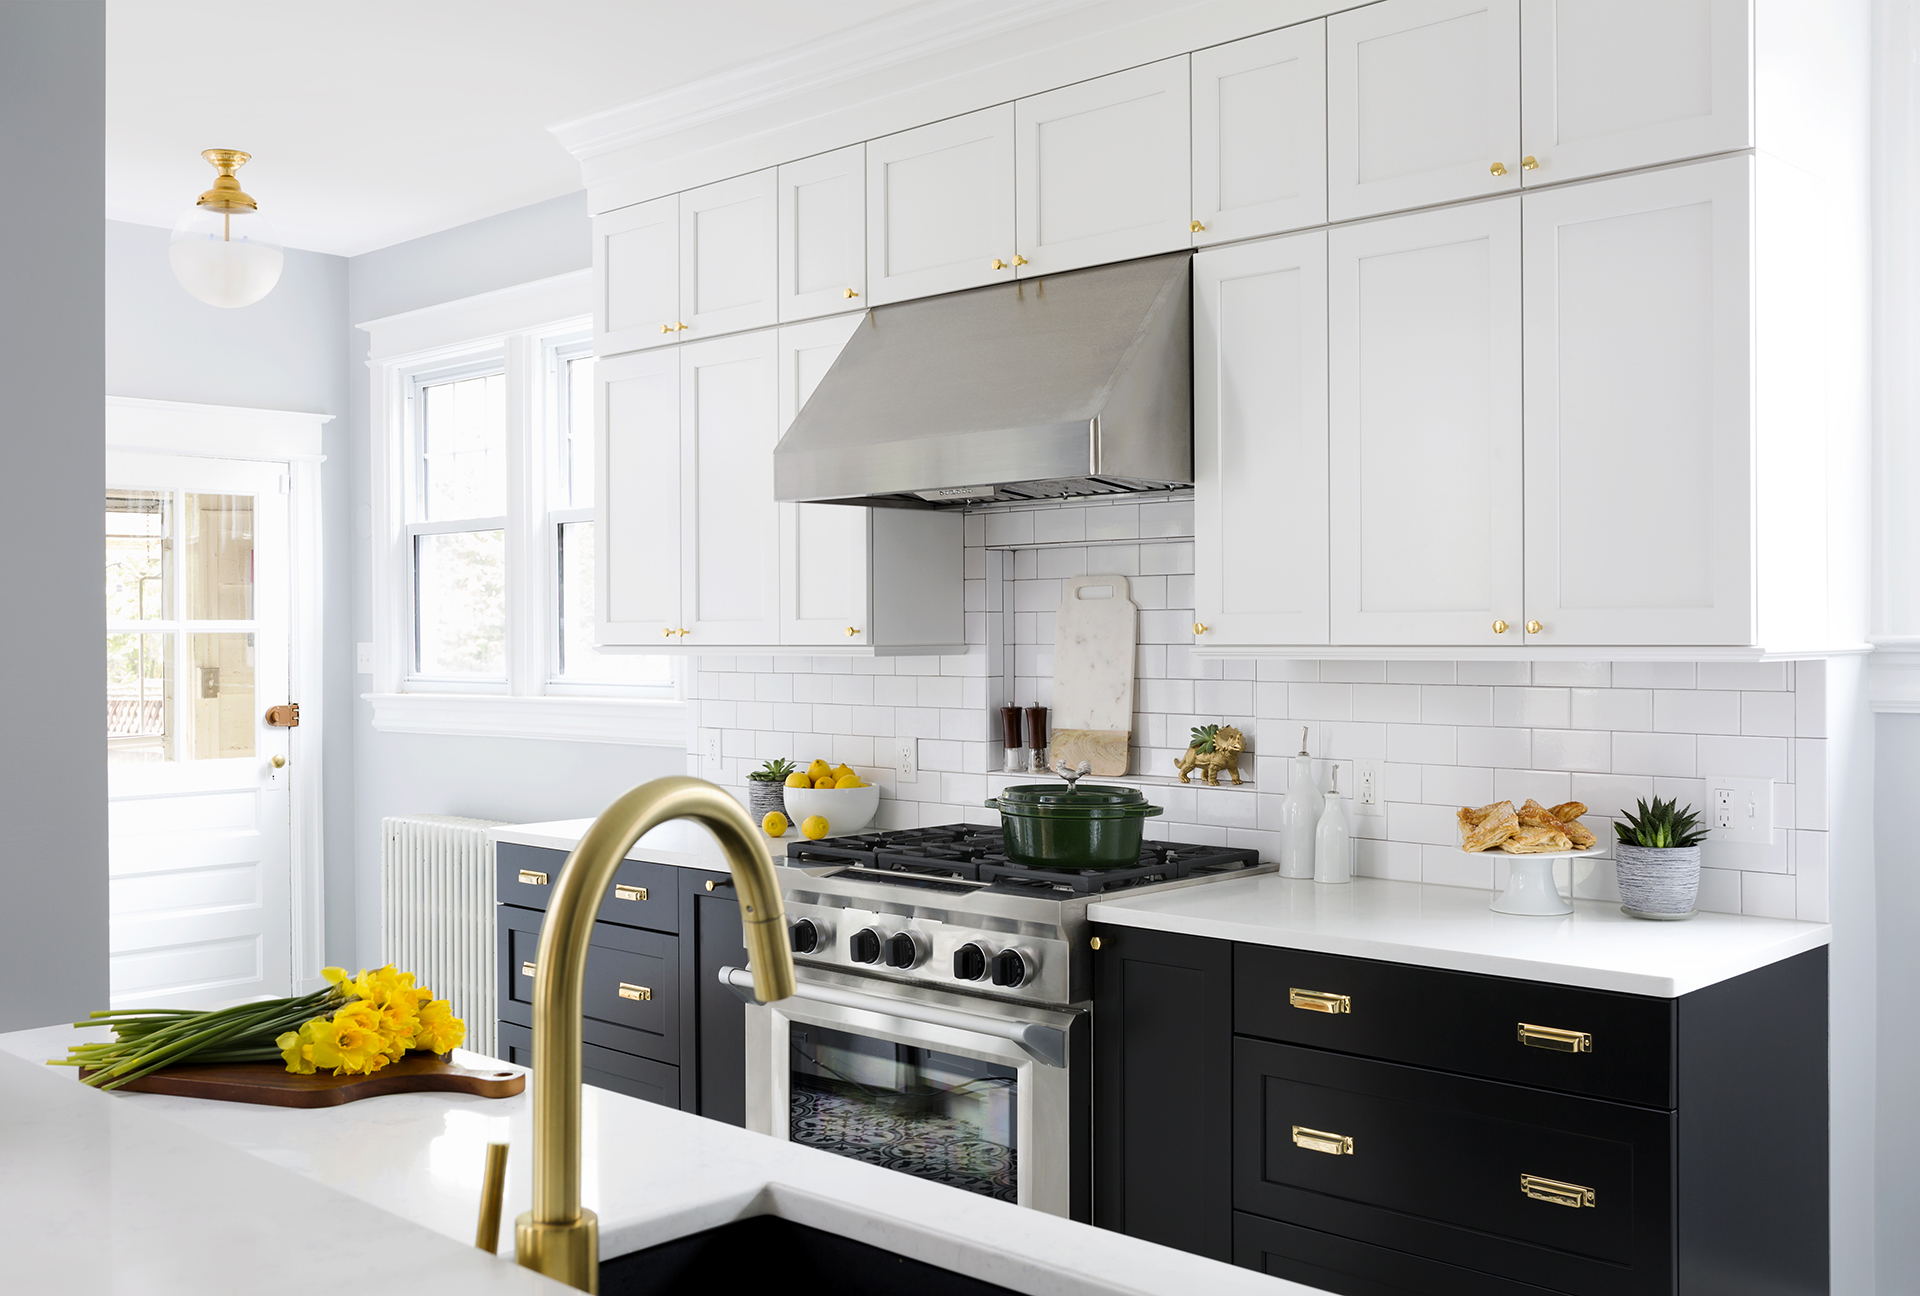 Pairings of Gold Kitchen Hardware with Stainless Appliances缩略图